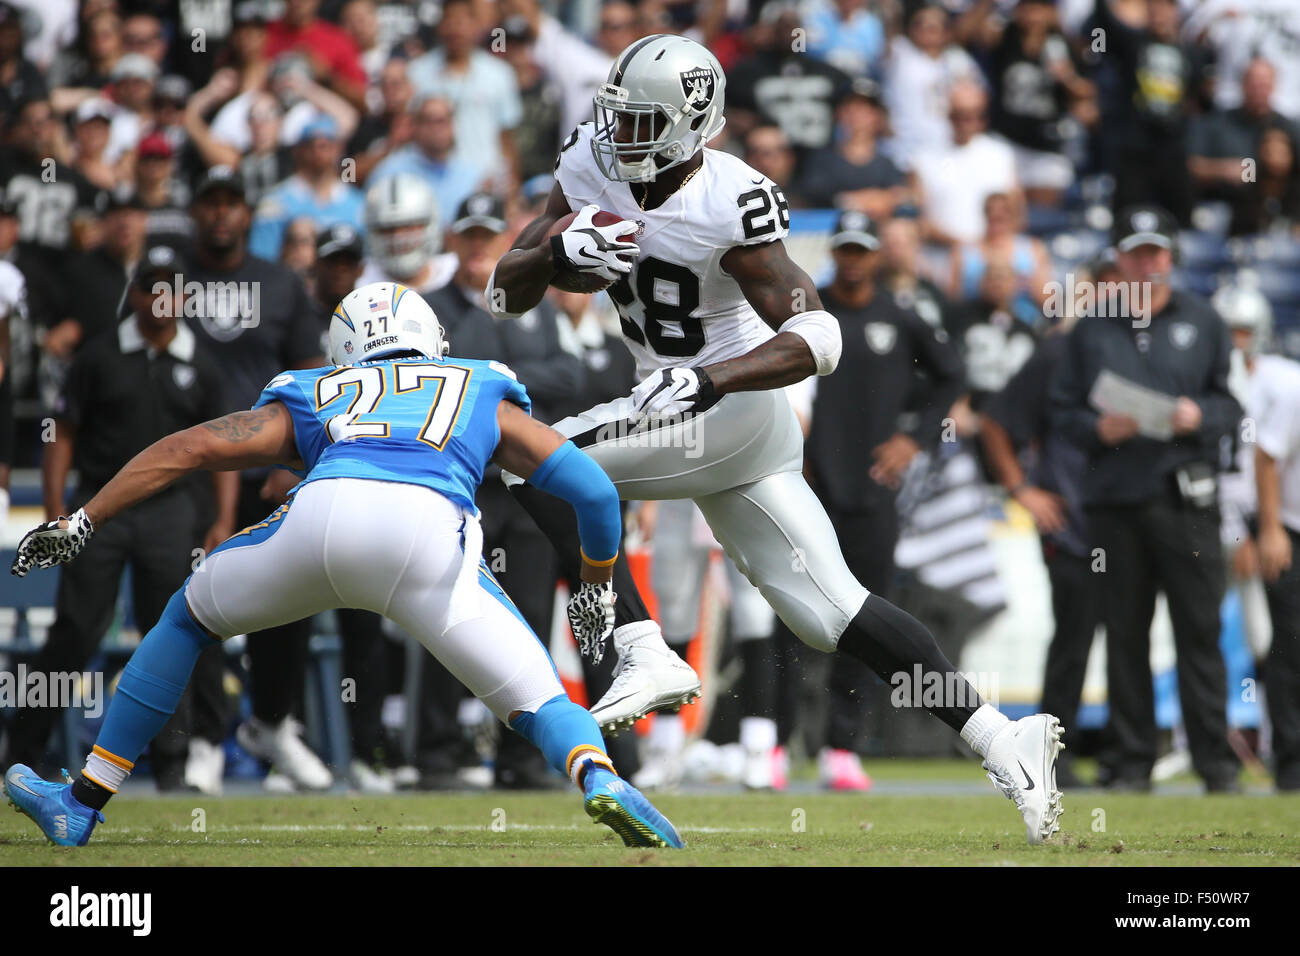 San Diego, CA, USA. 25th Oct, 2015. October 25, 2015: Oakland Raiders running back Latavius Murray (28) finds some running room as San Diego Chargers strong safety Jimmy Wilson (27) pursues in the game between the Oakland Raiders and San Diego Chargers, Qualcomm Stadium, San Diego, CA. Photographer: Peter Joneleit/ ZUMA Wire Service Credit:  Peter Joneleit/ZUMA Wire/Alamy Live News Stock Photo